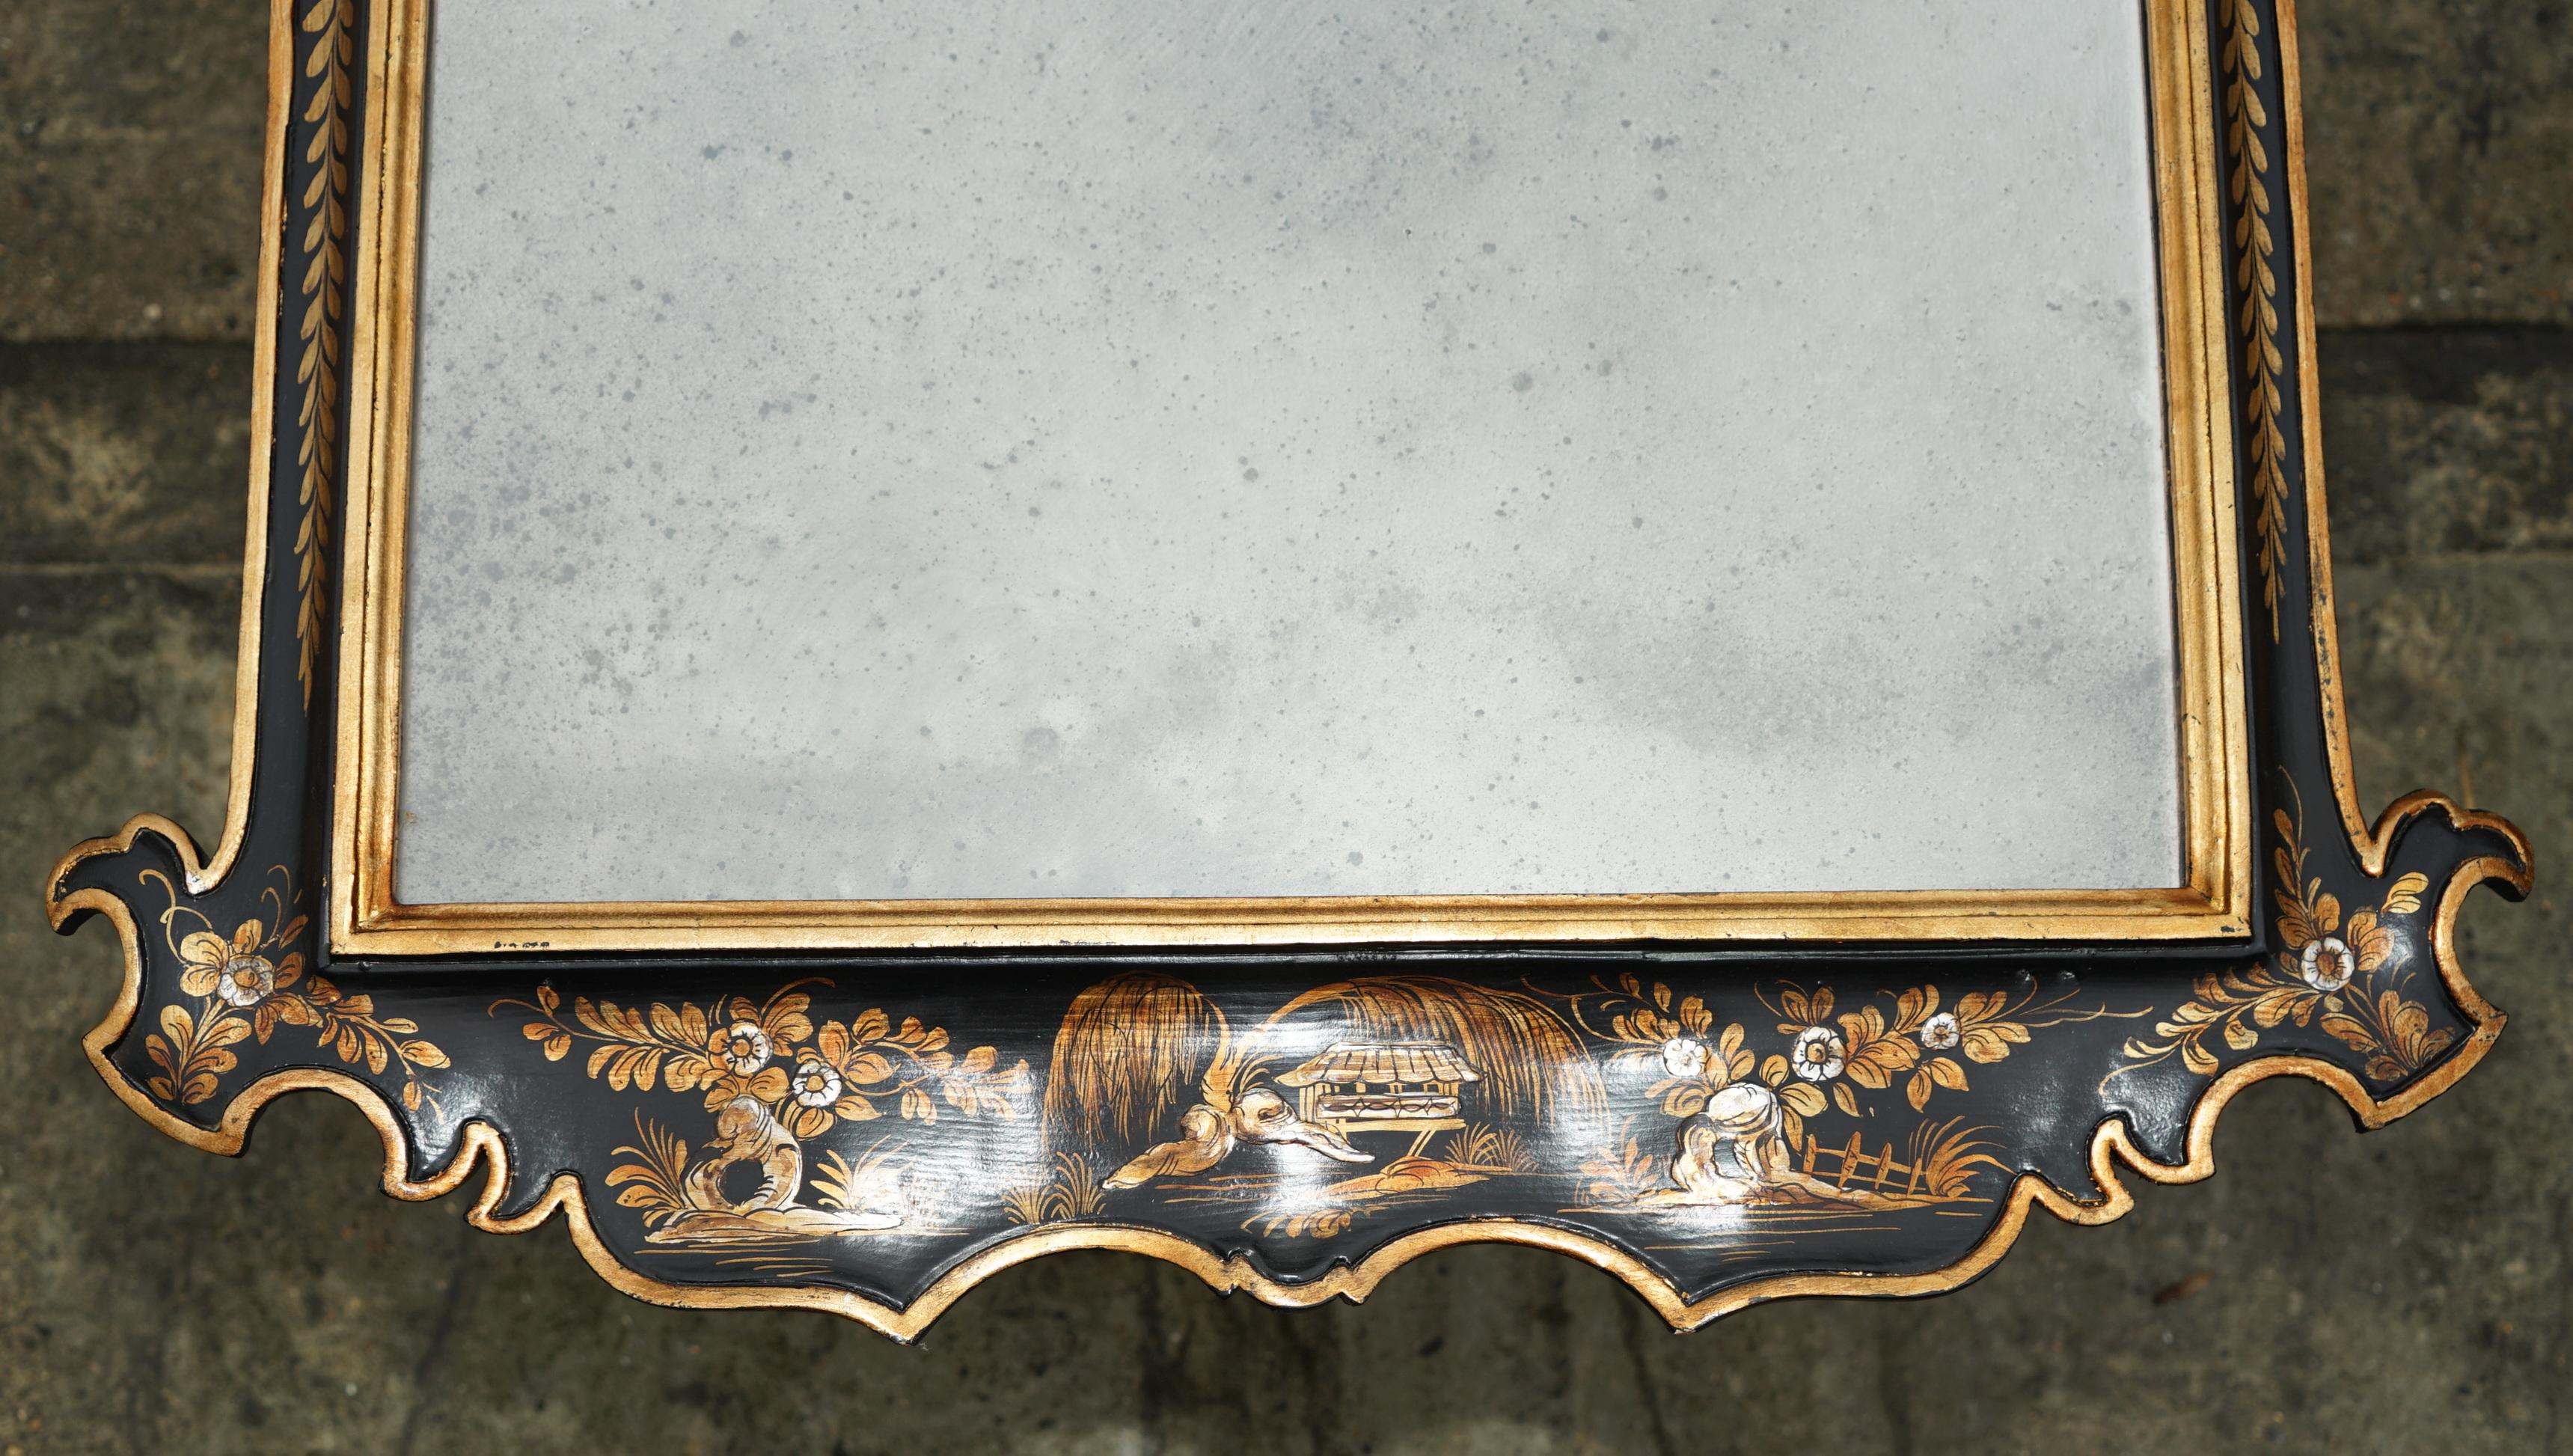 Chinoiserie 1.4 METER CHINESE CHINOISERIE MiRROR ORNATE HAND PAINTINGS STAMPED MADE IN ITALY For Sale